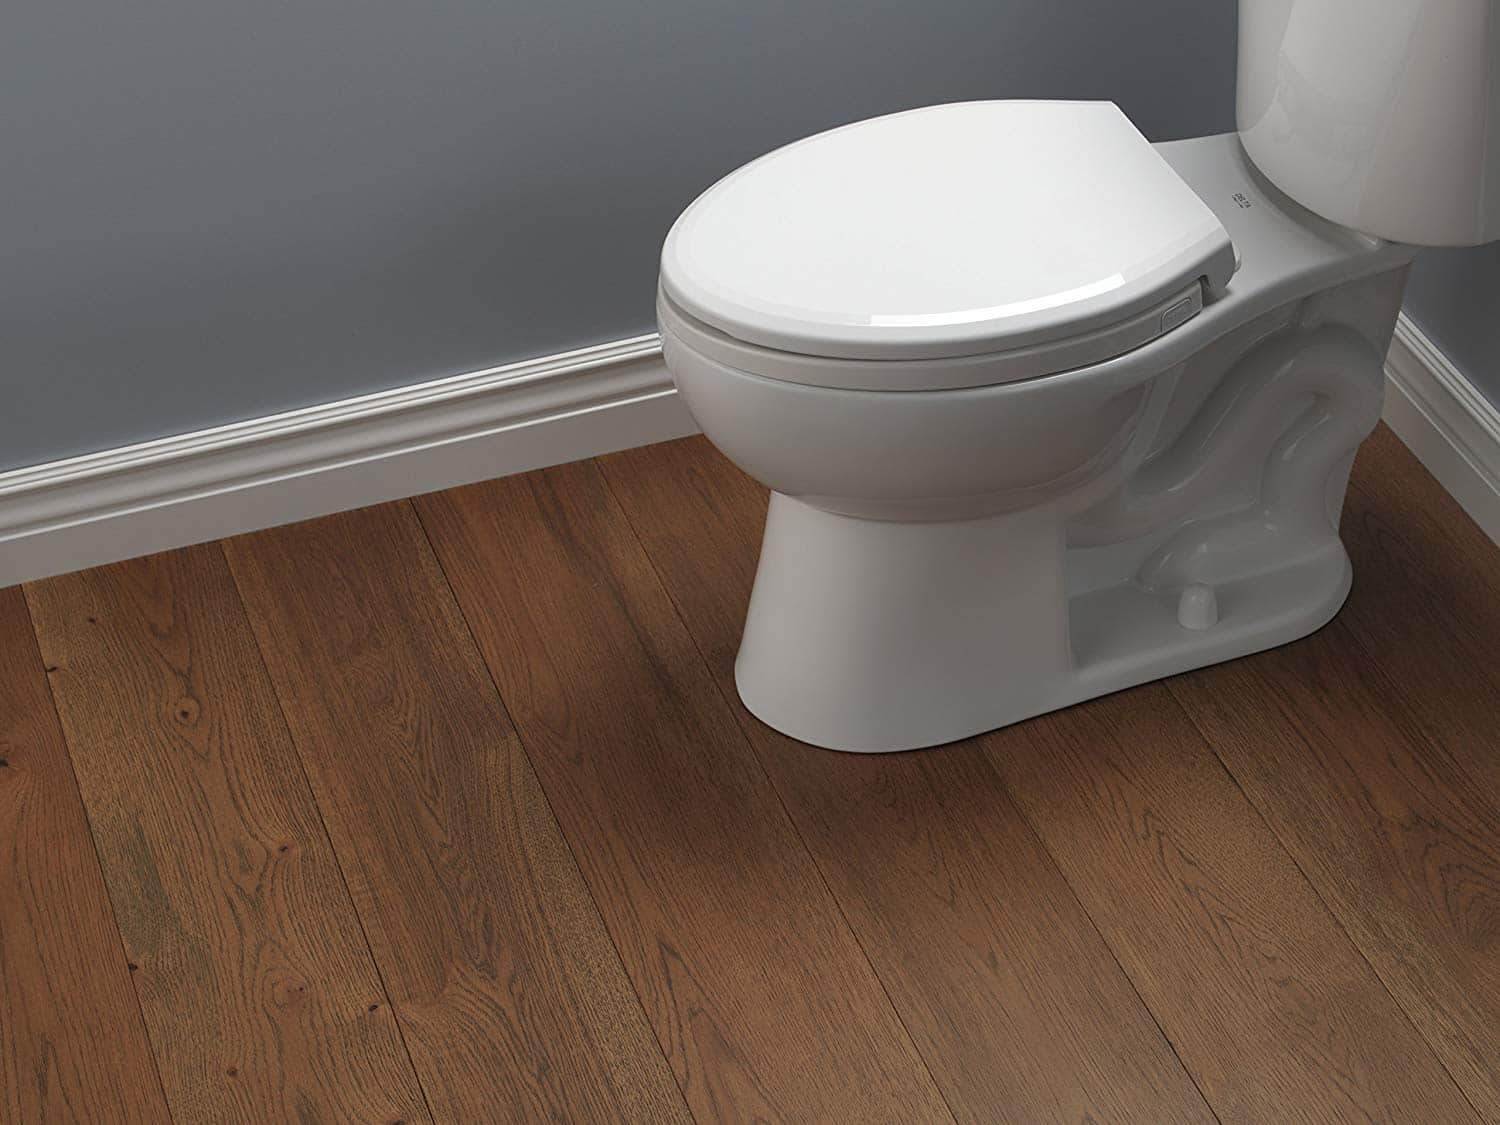 round soft toilet seat with durable wood core